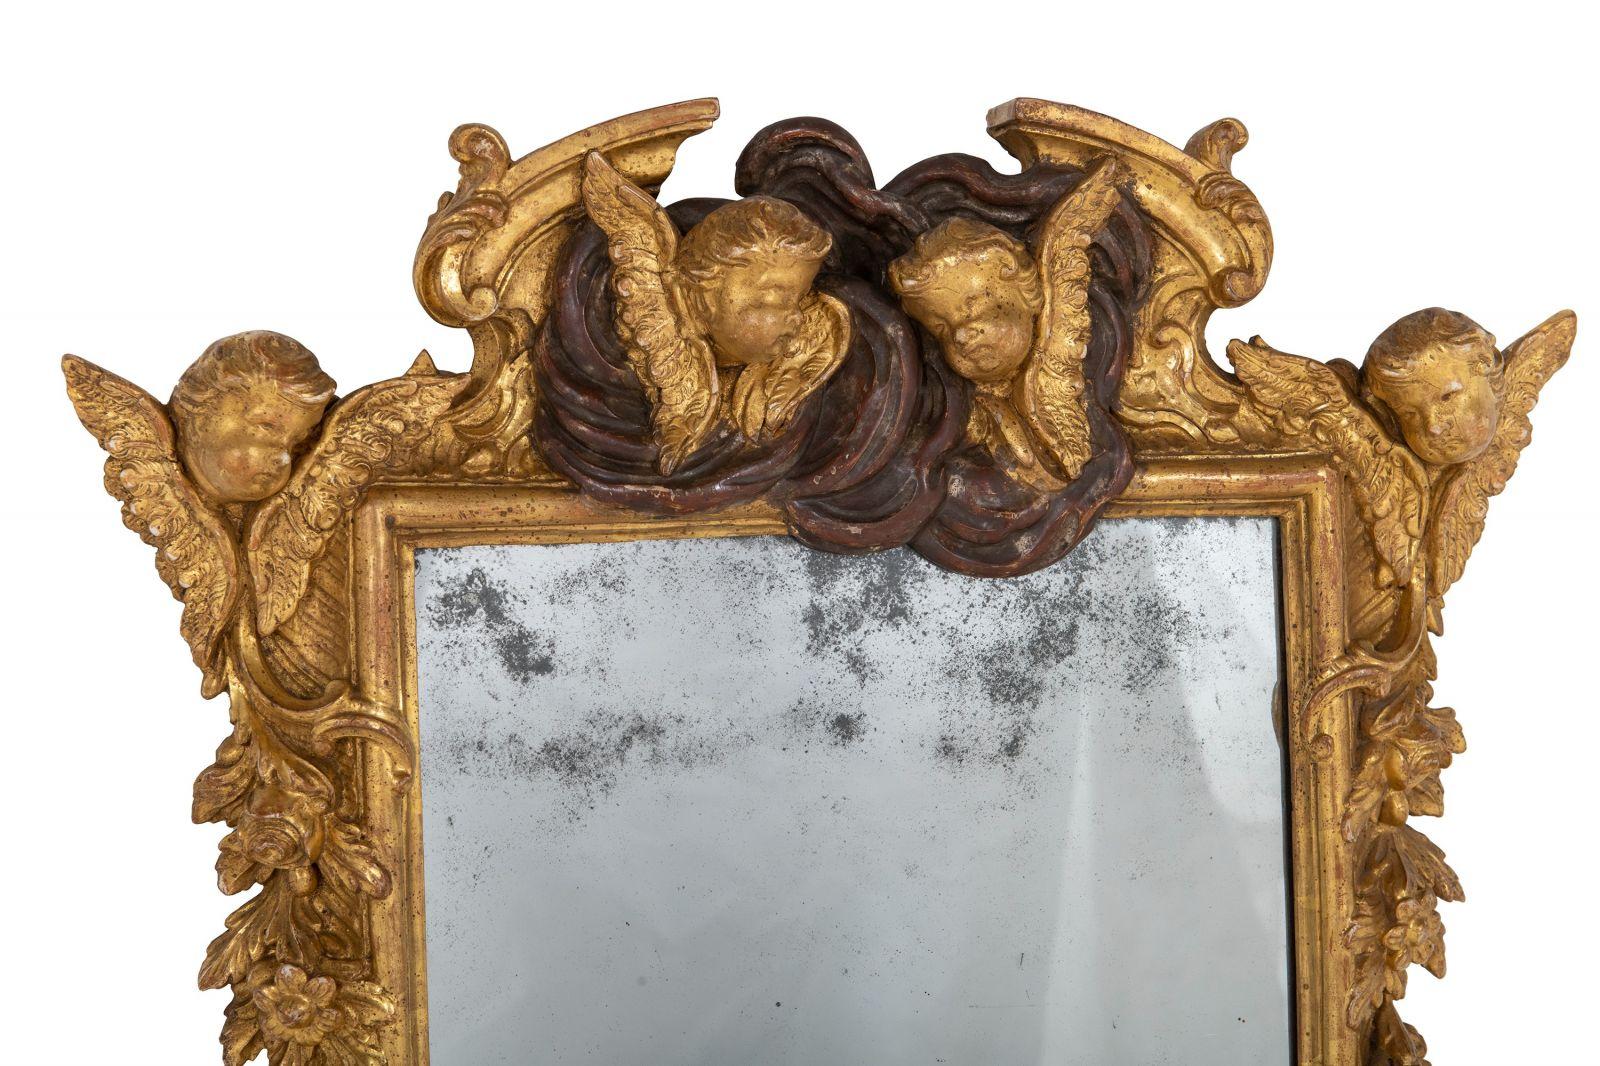 Introducing a Pair of Baroque Giltwood and Gesso Wall Mirrors from Circa 1700 and later. This remarkable set offers a touch of 18th-century grandeur, featuring rectangular plates framed with intricate 'C' scrolls, flowers, and winged cherubs. The